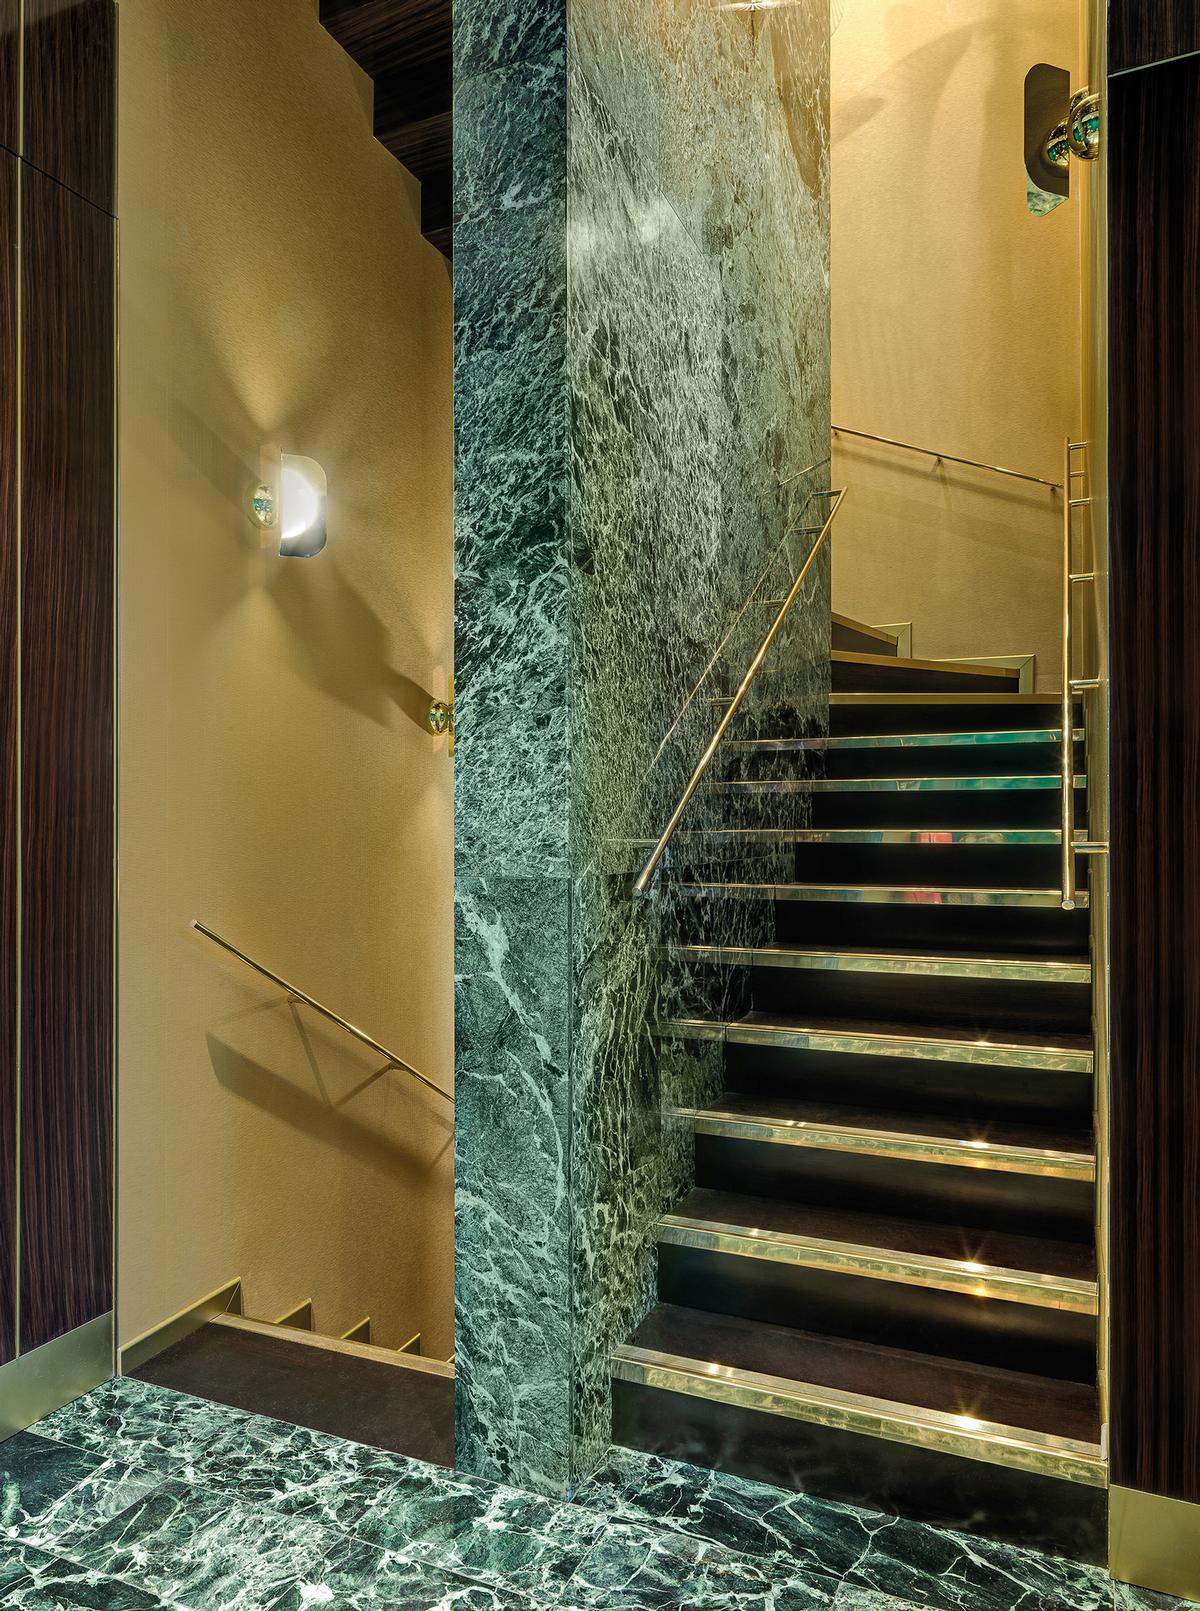 Green Alpi marble is used through the space / Matteo Piazza